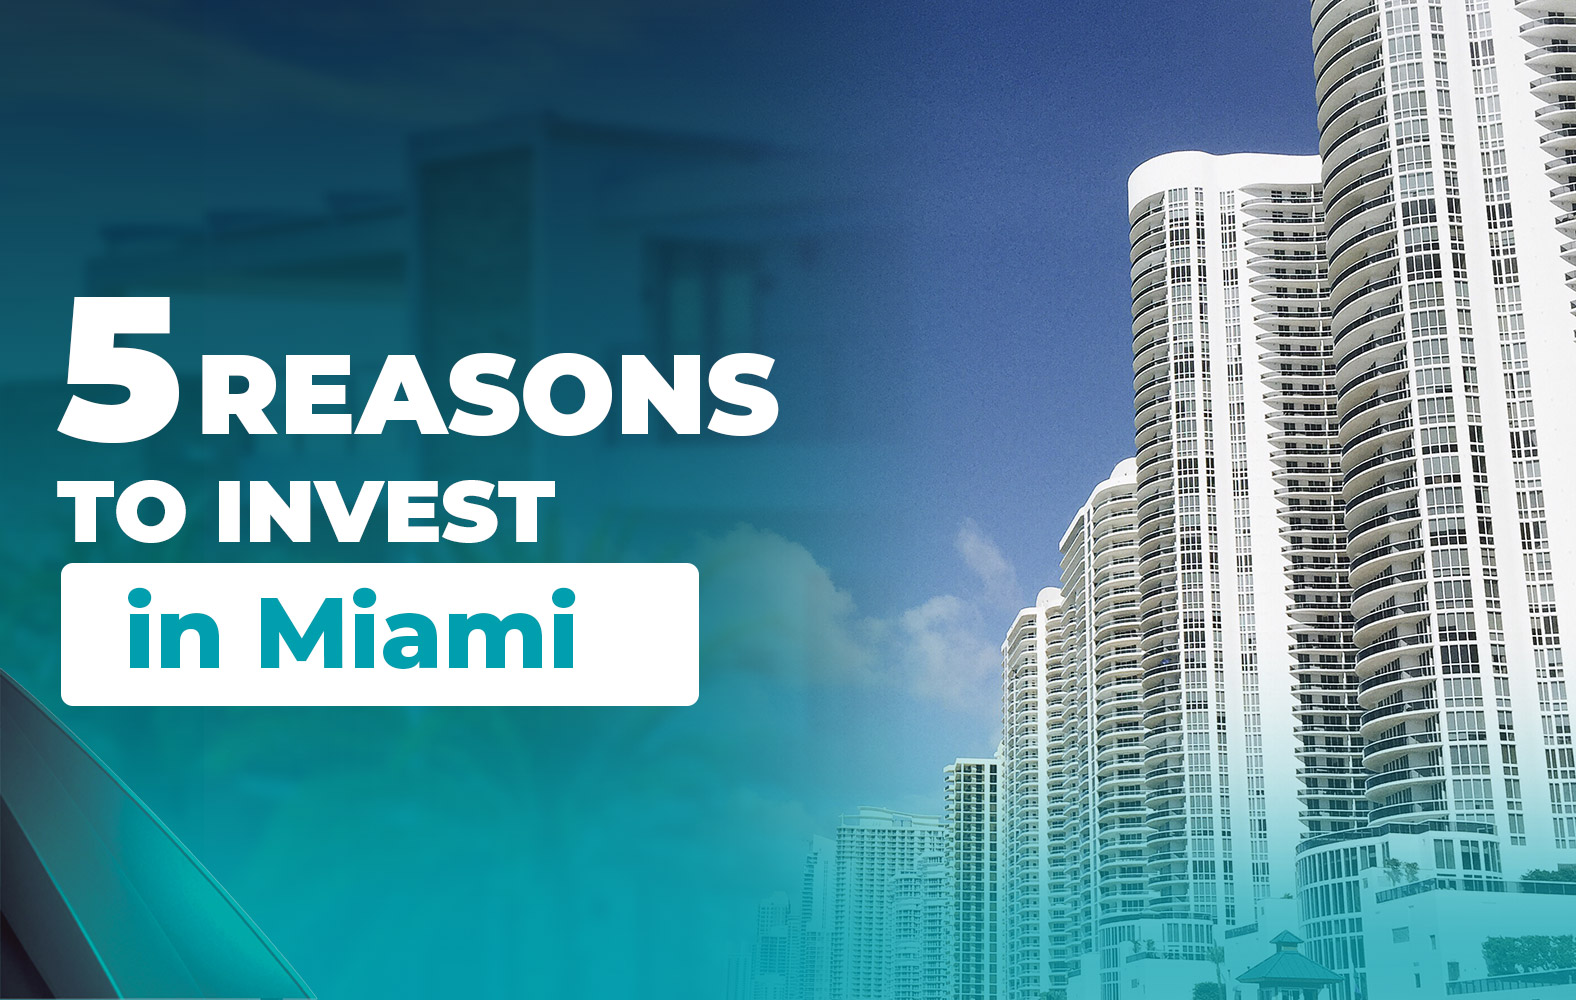 Reasons to invest in Miami